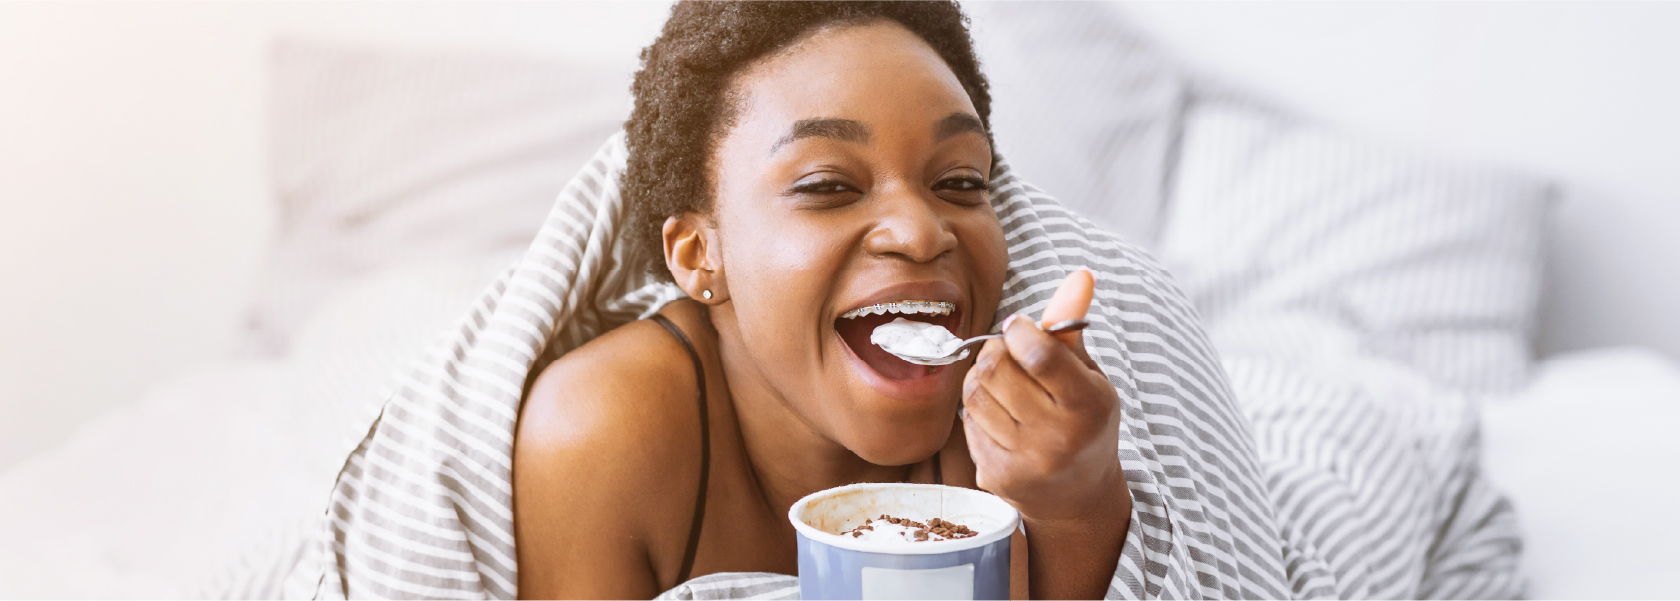 Girl Eating Ice Cream in Bed